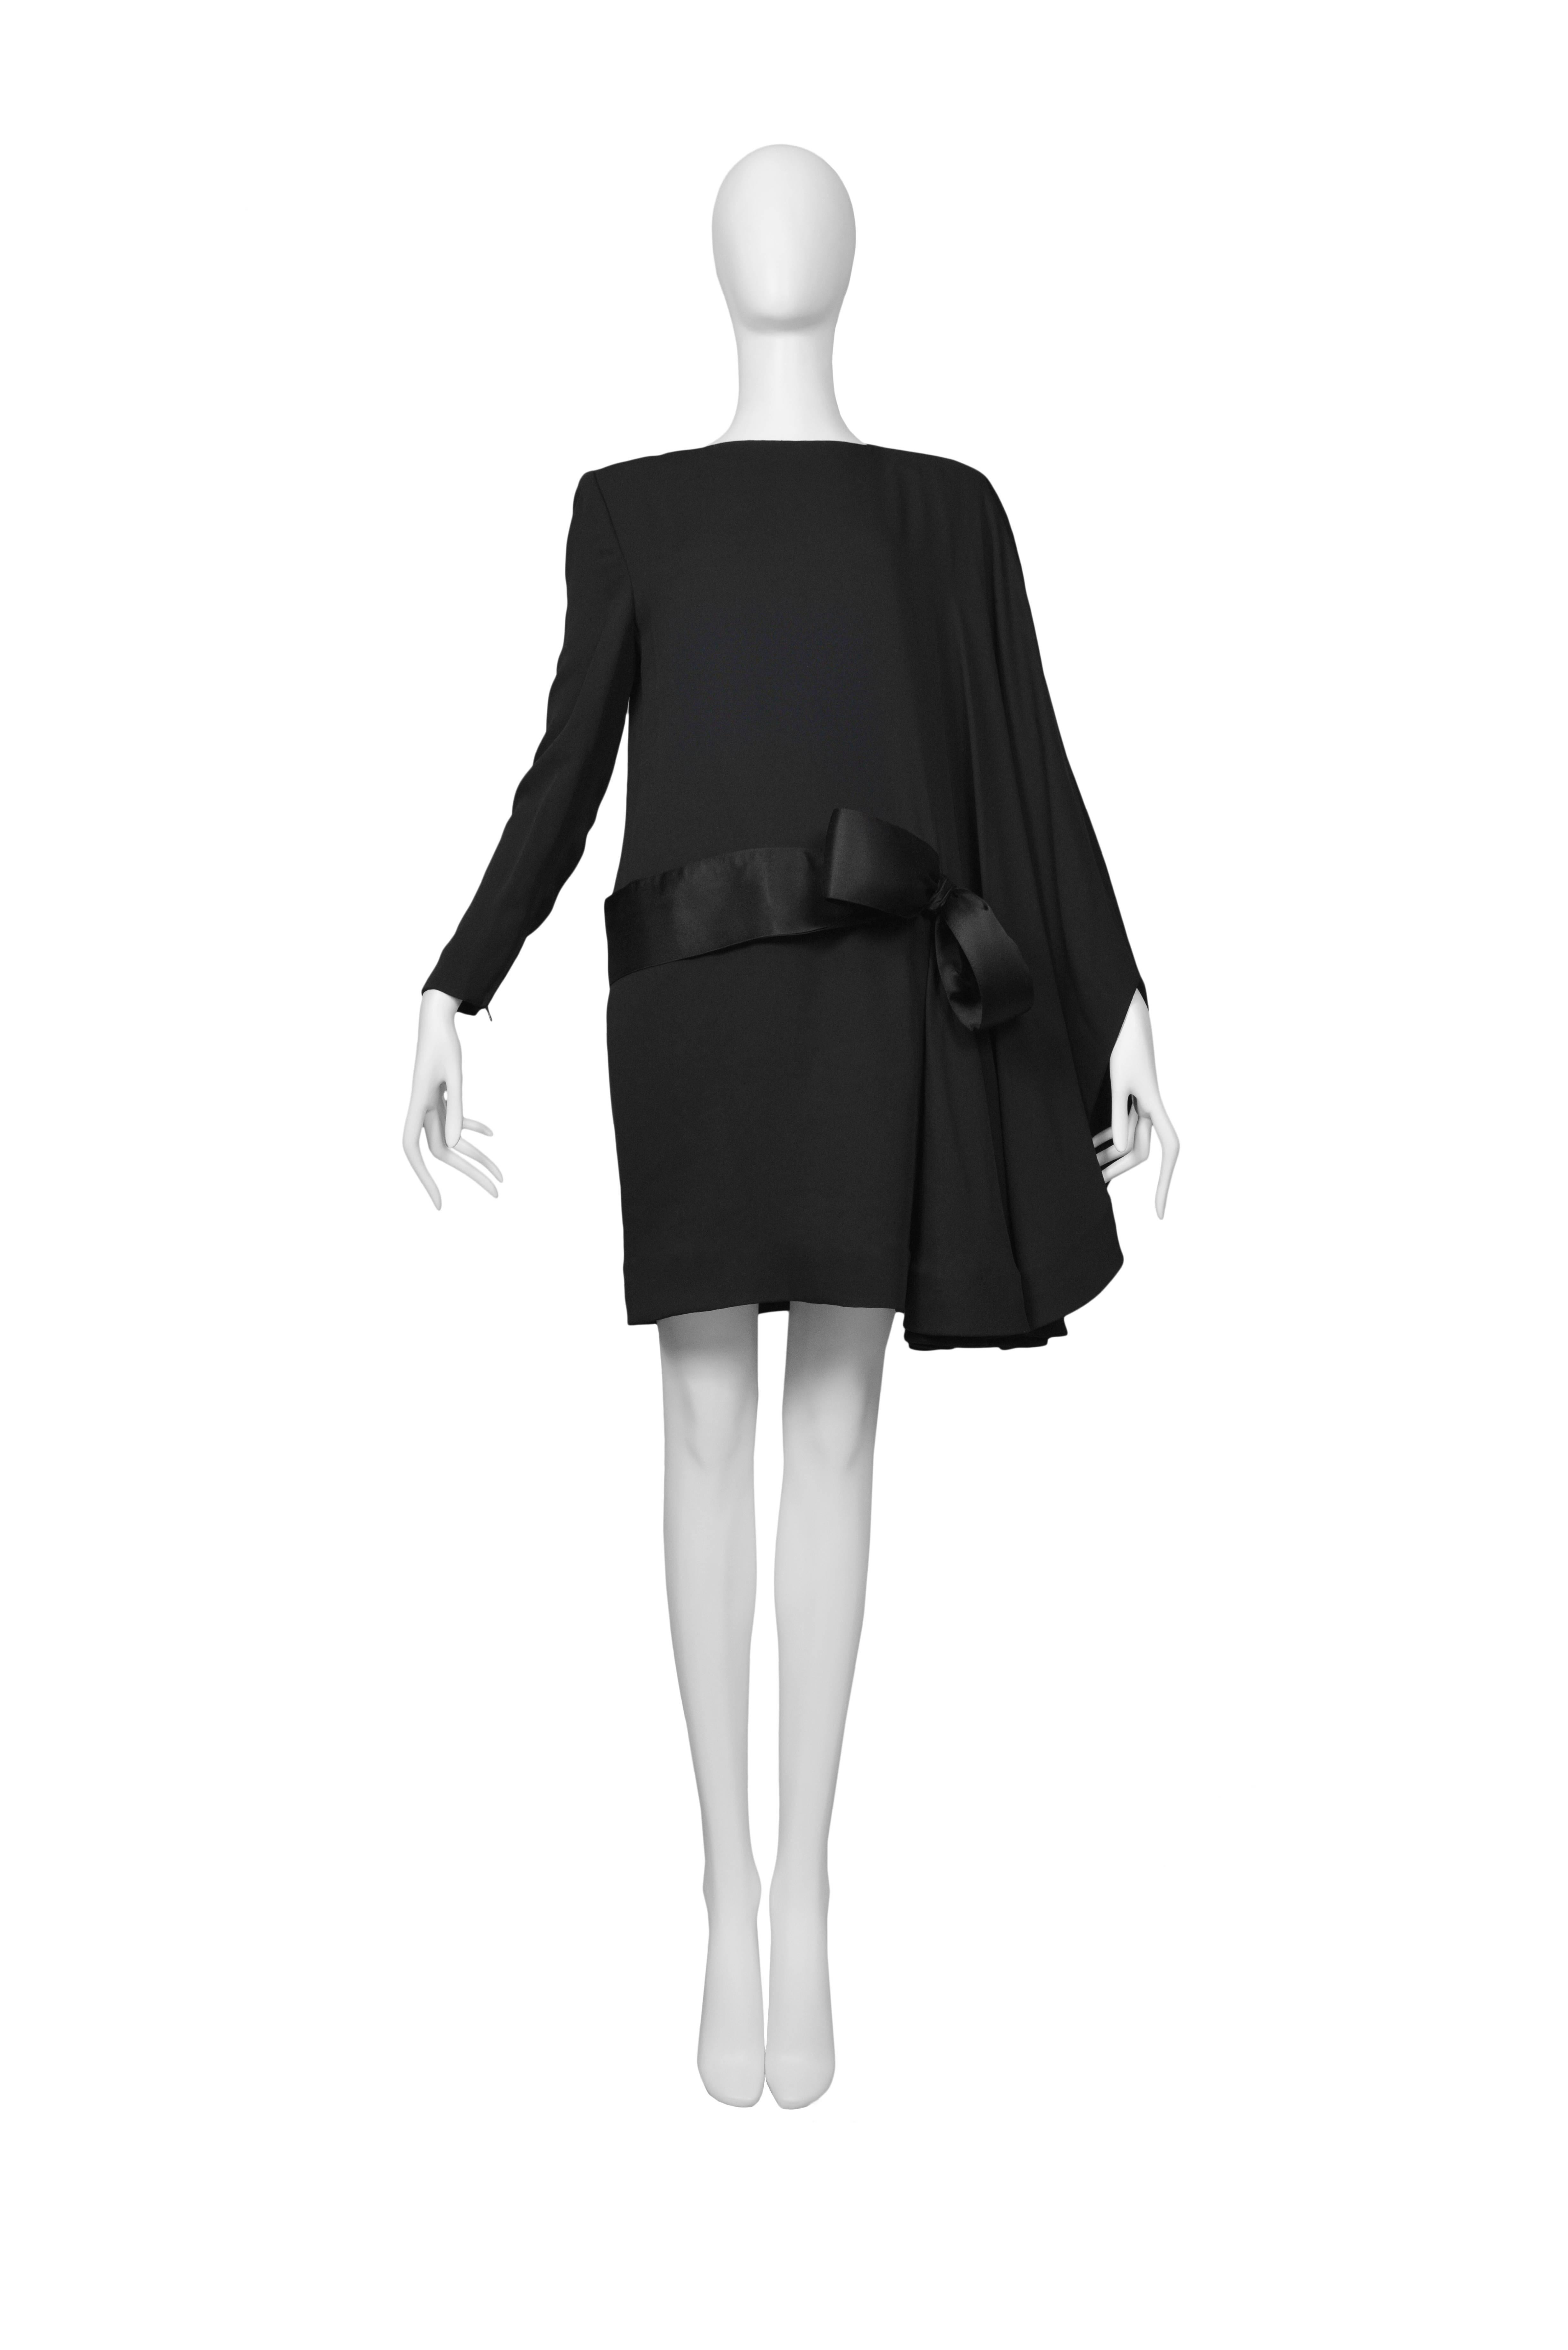 Pierre Cardin Couture origami black bow dress with large asymmetrical drape. Circa, 1986-1993.
Please inquire for additional images.